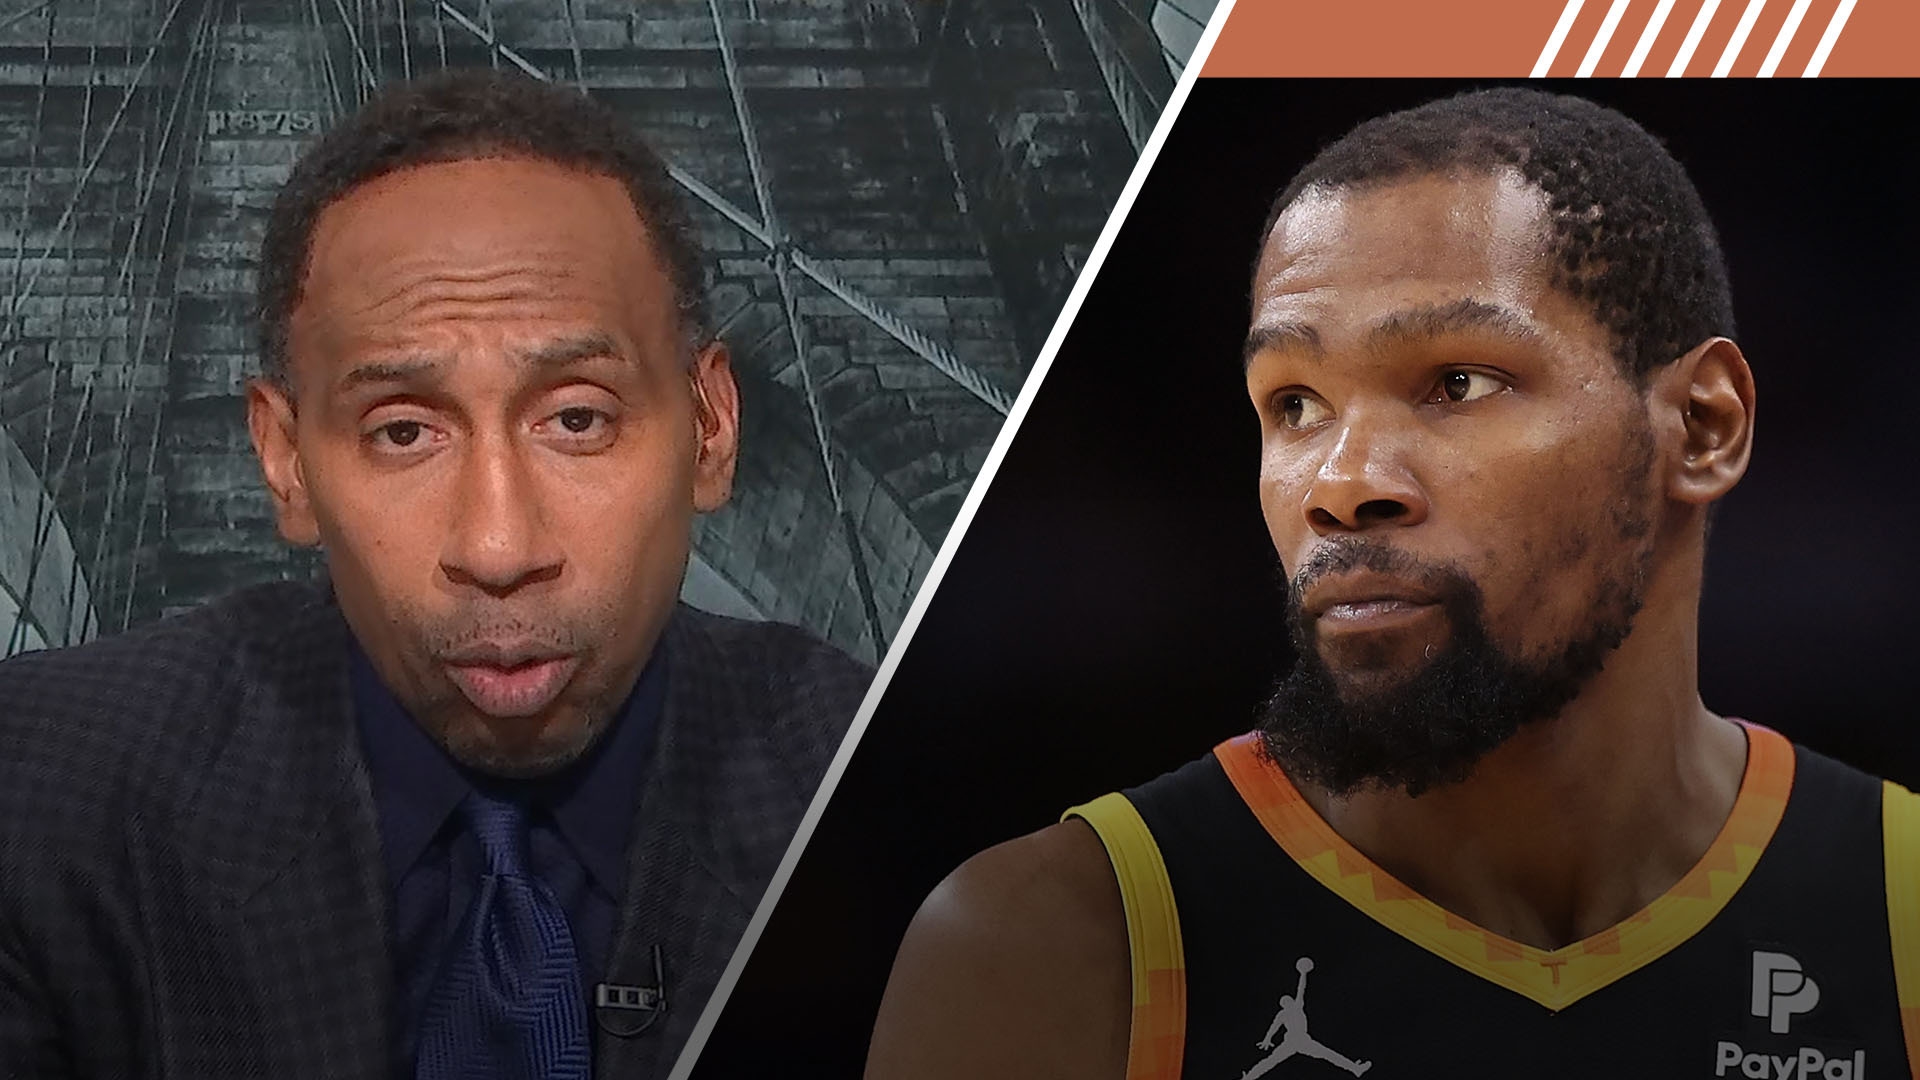 Stephen A. not buying Suns owner saying team won't trade KD